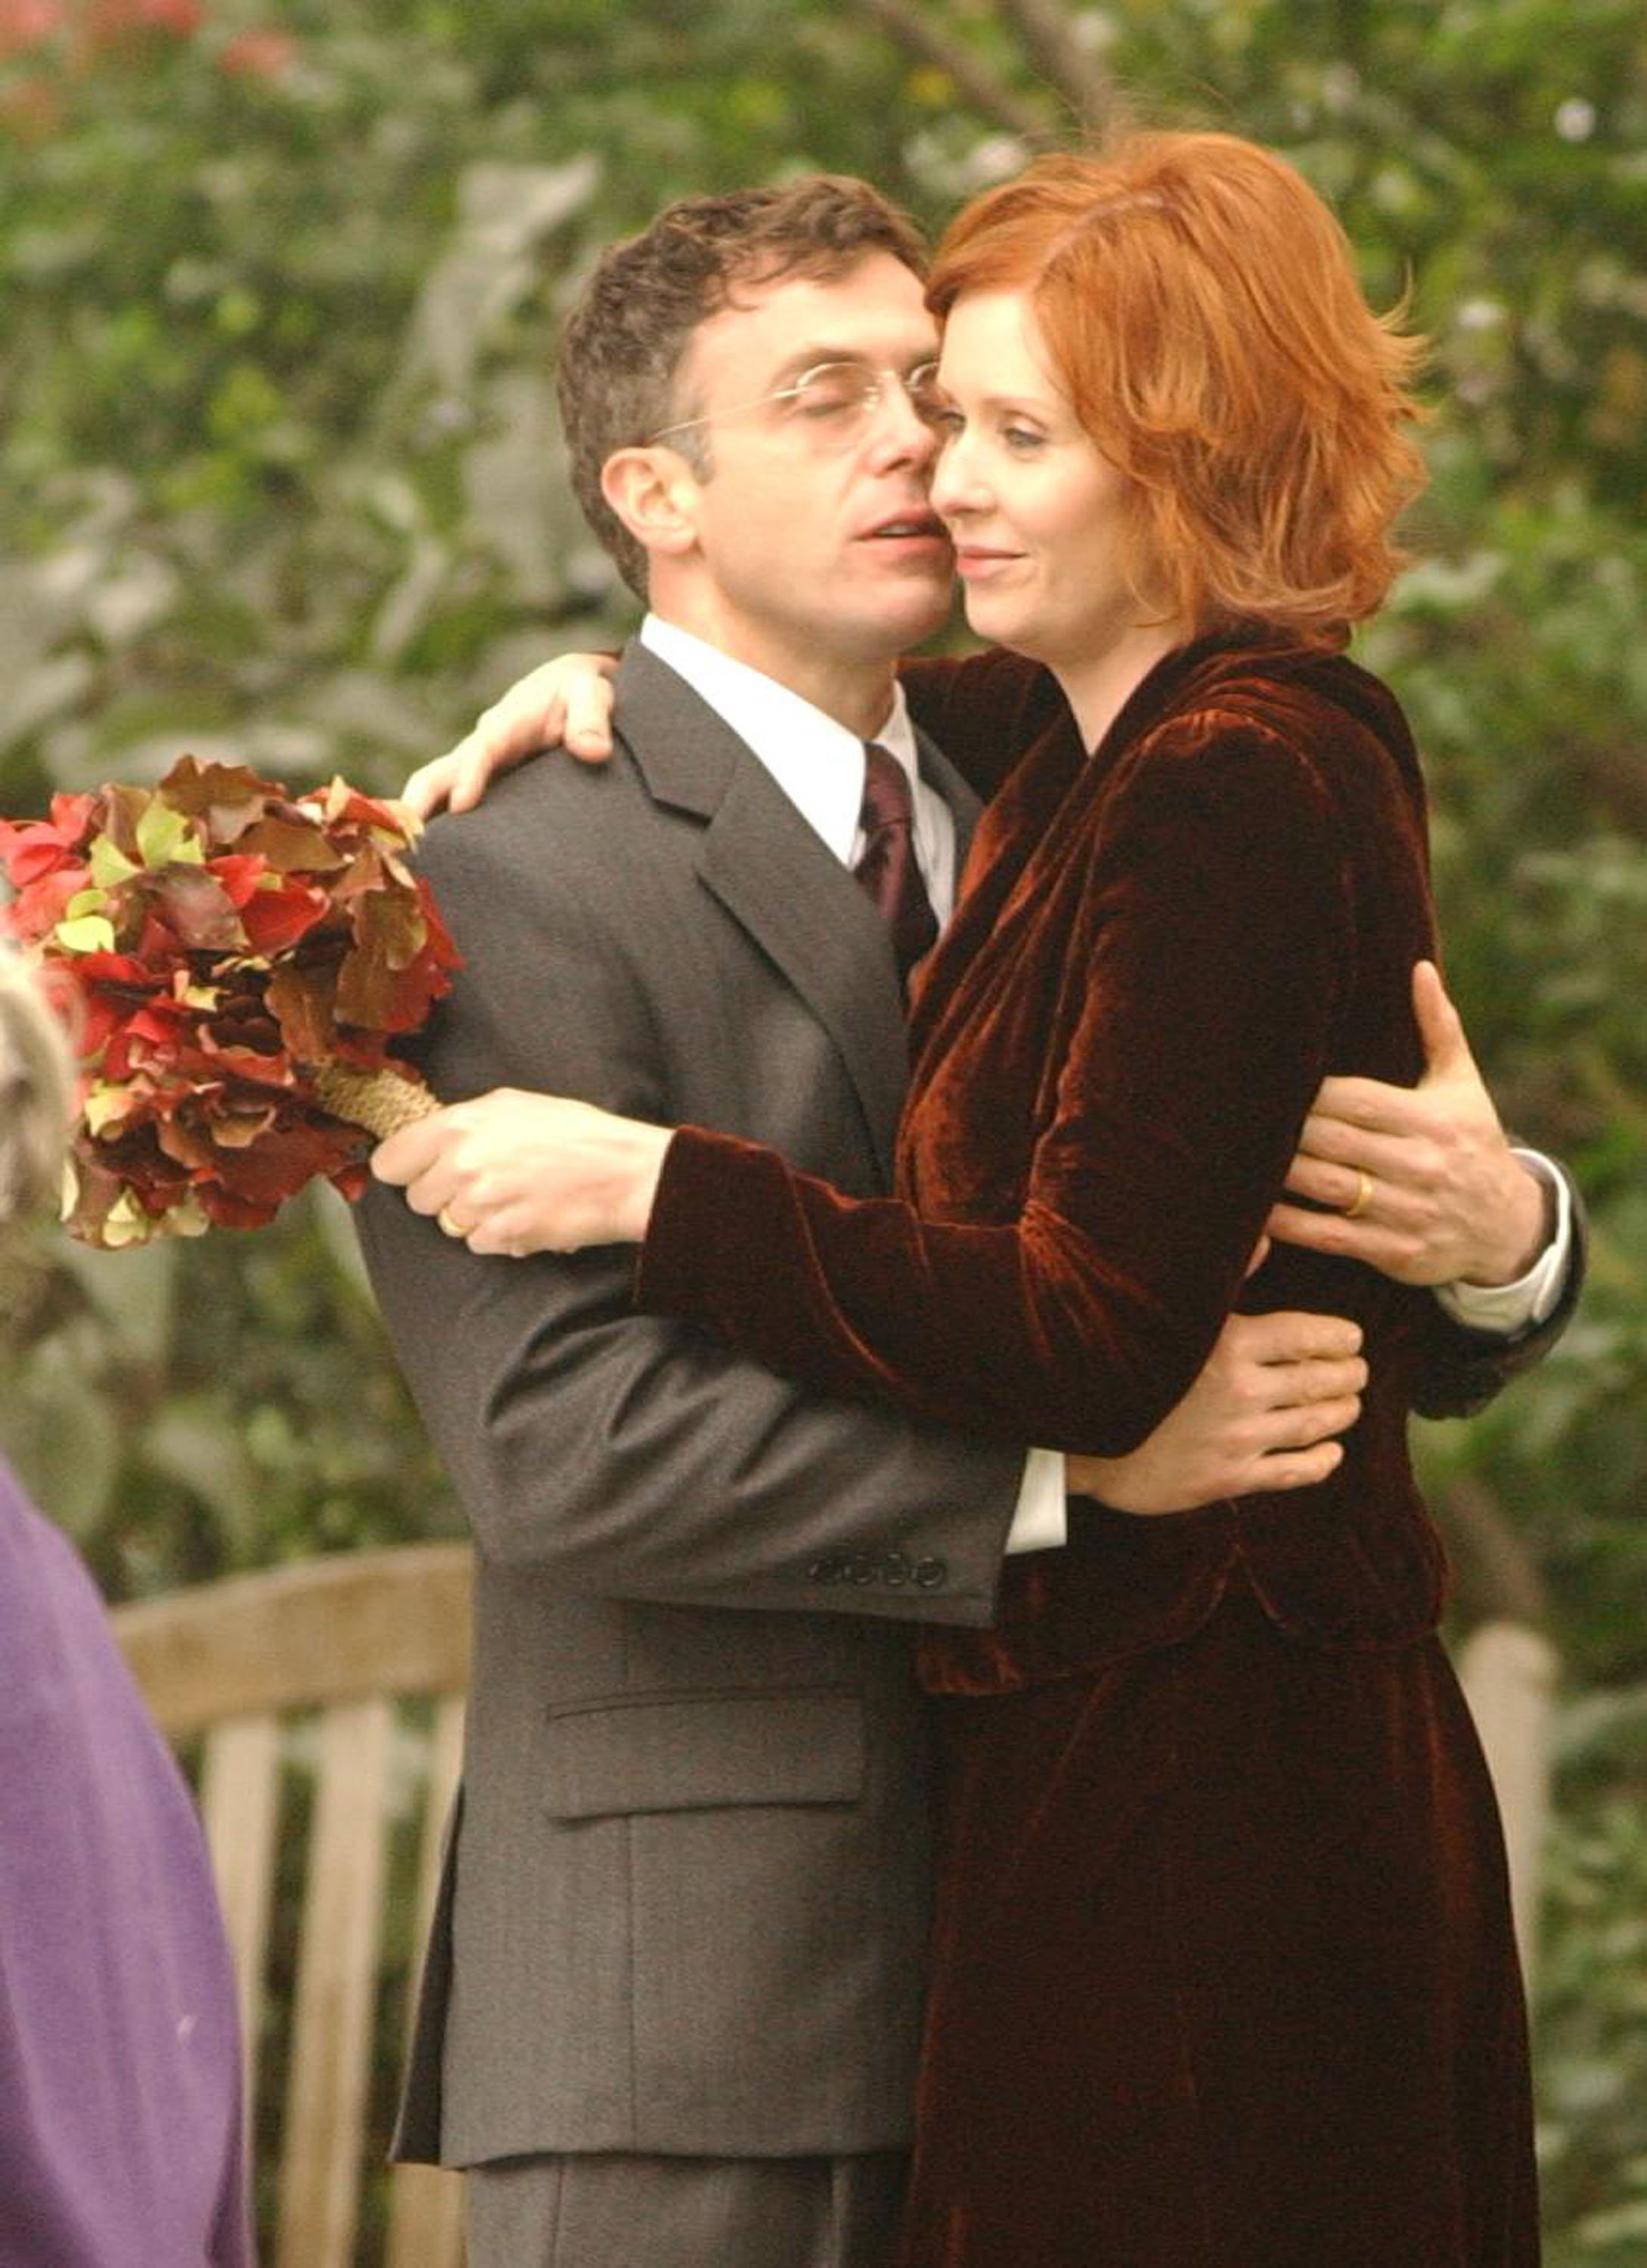 David Eigenberg and Cynthia Nixon hug during the filming of 'Sex and the City'